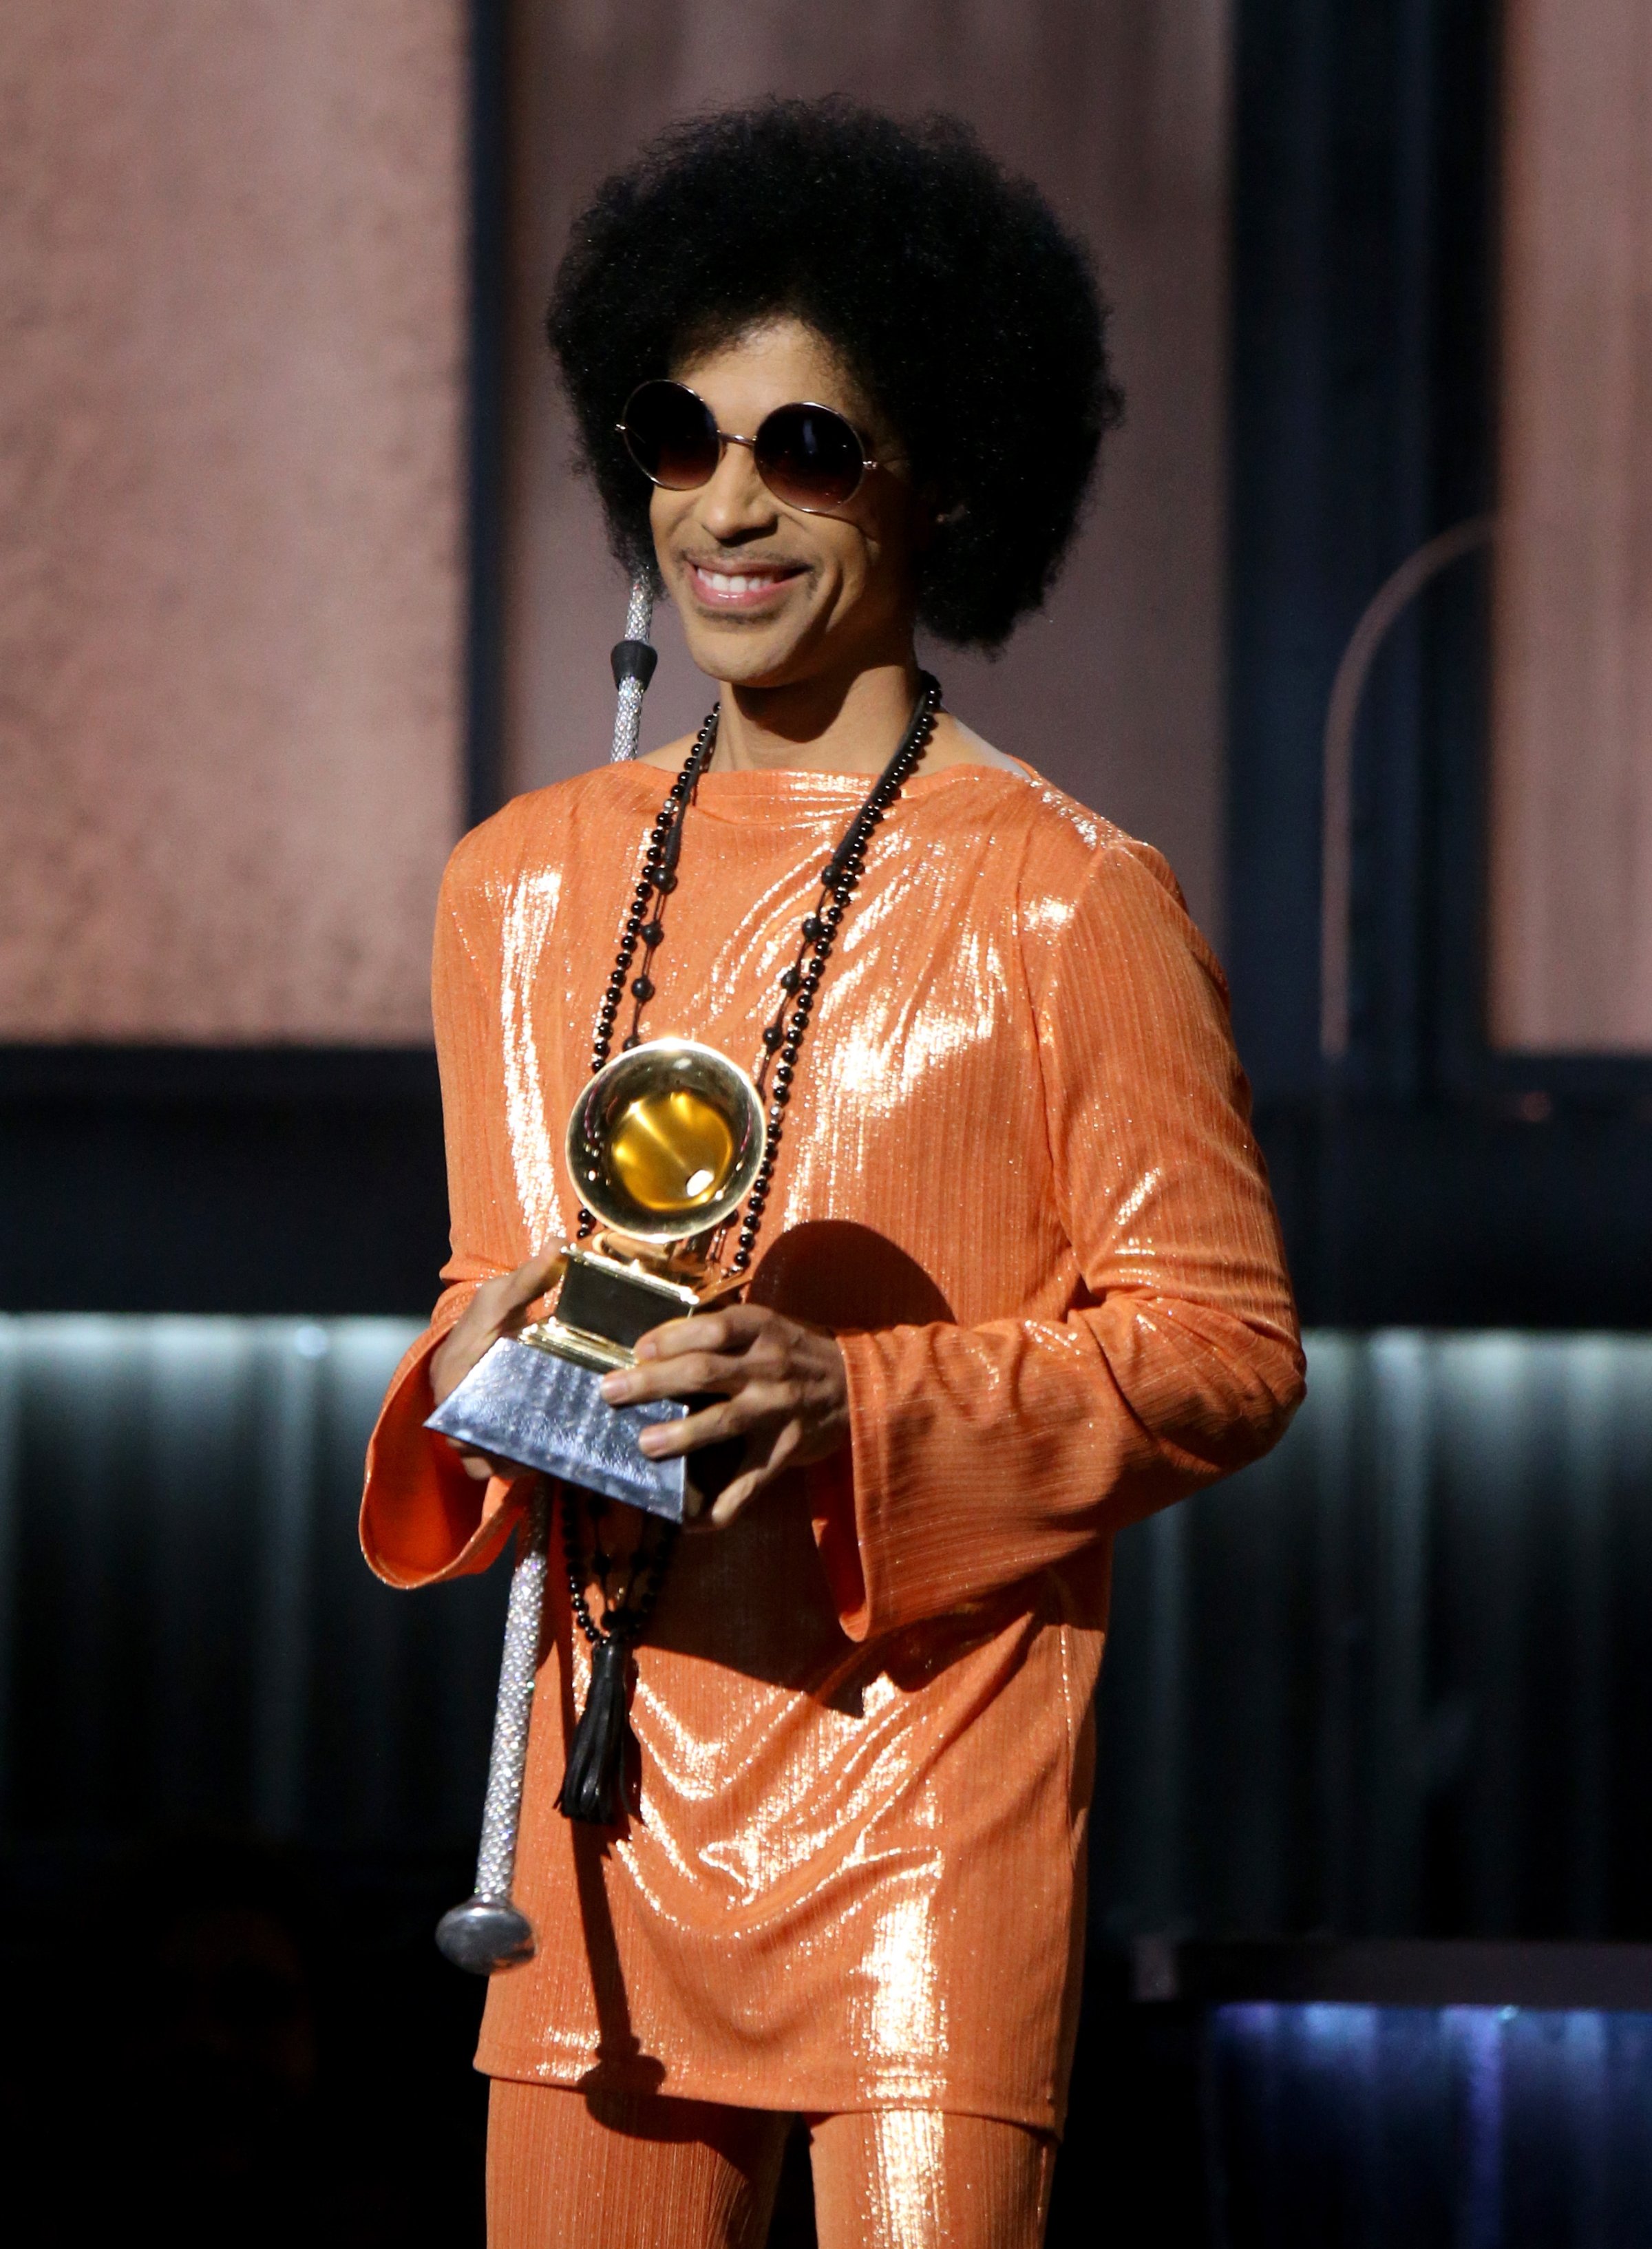 Prince speaks onstage during The 57th Annual GRAMMY Awards at on February 8, 2015 in Los Angeles, California.